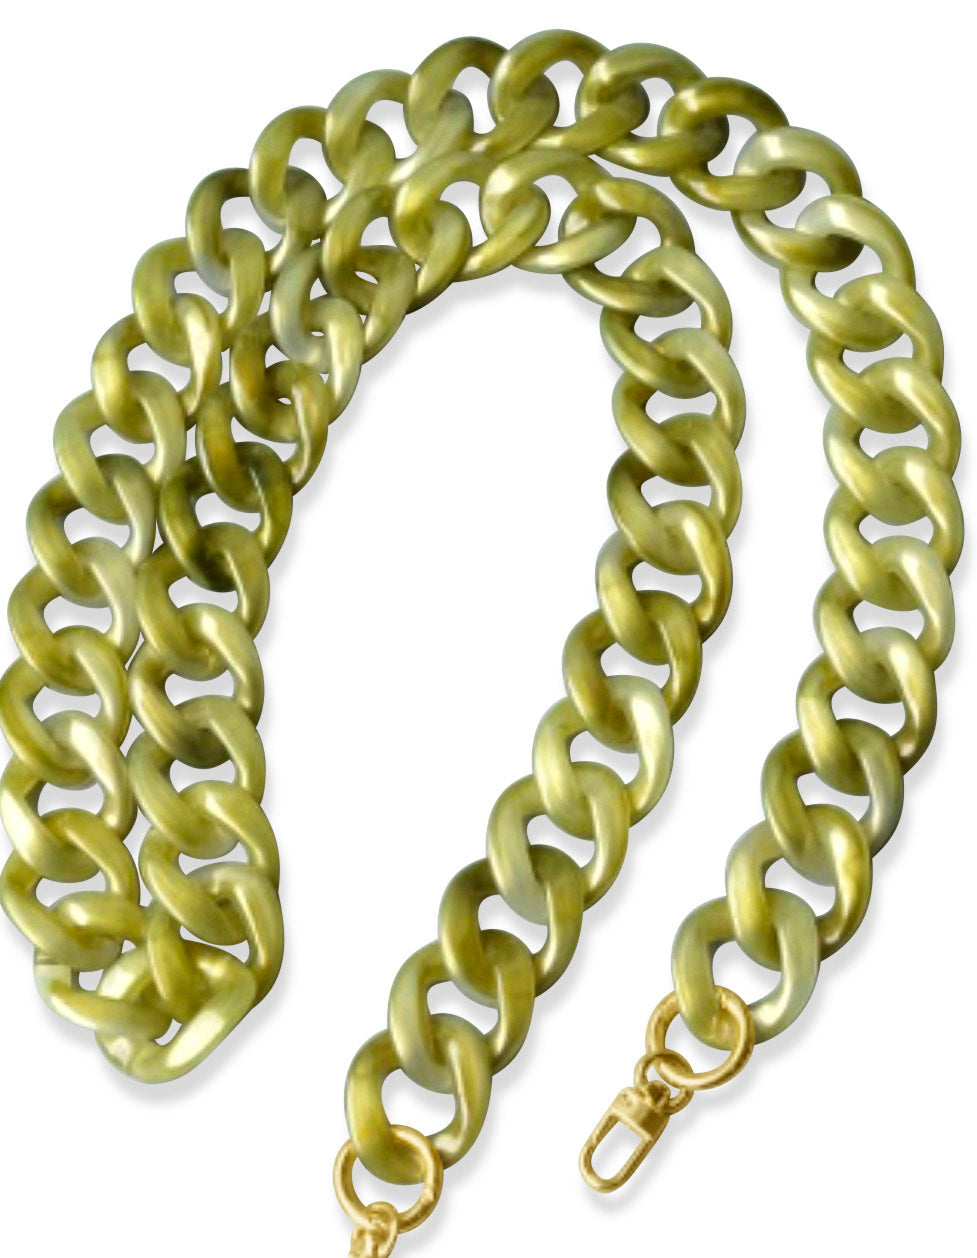 Lime acrylic cell chain